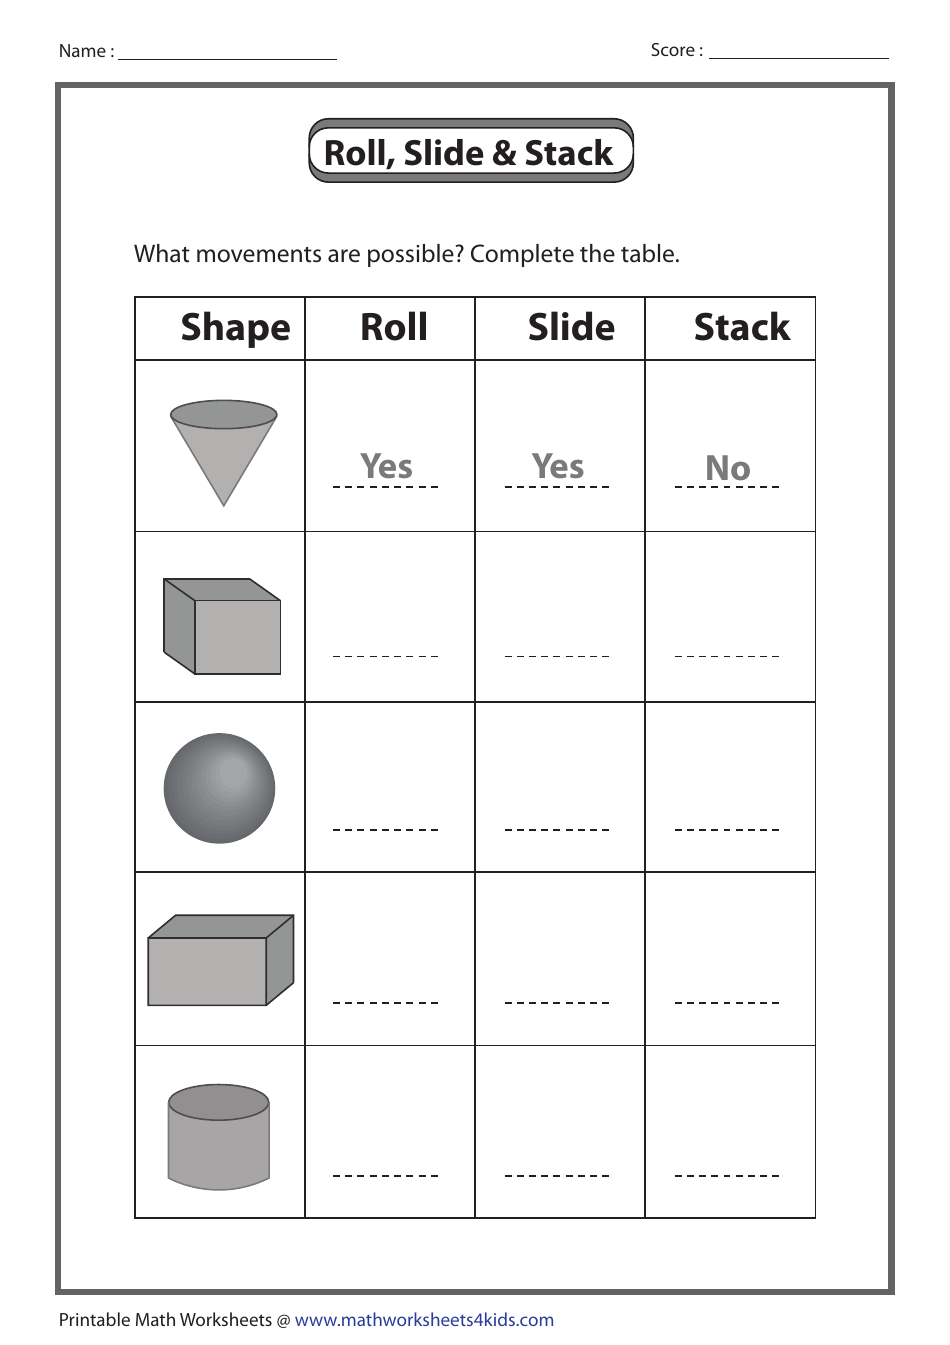 Roll, Slide and Stack Shapes Worksheet With Answers Preview